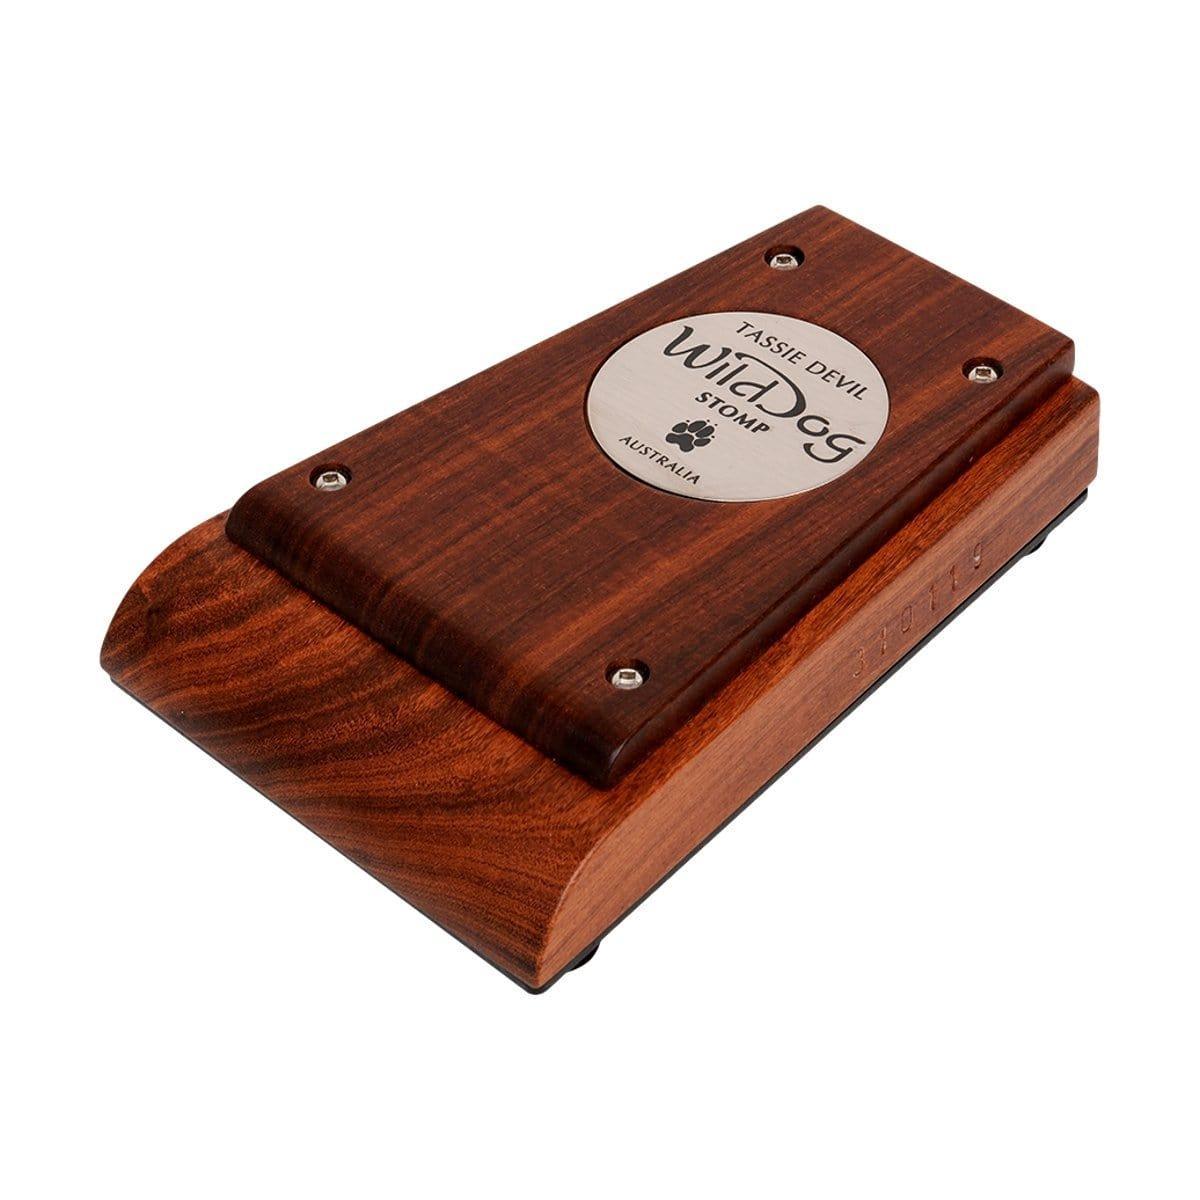 Tassie Devil Compact Stomp Box Deluxe Timbers - Stomp Boxes by Wild Dog at Muso's Stuff